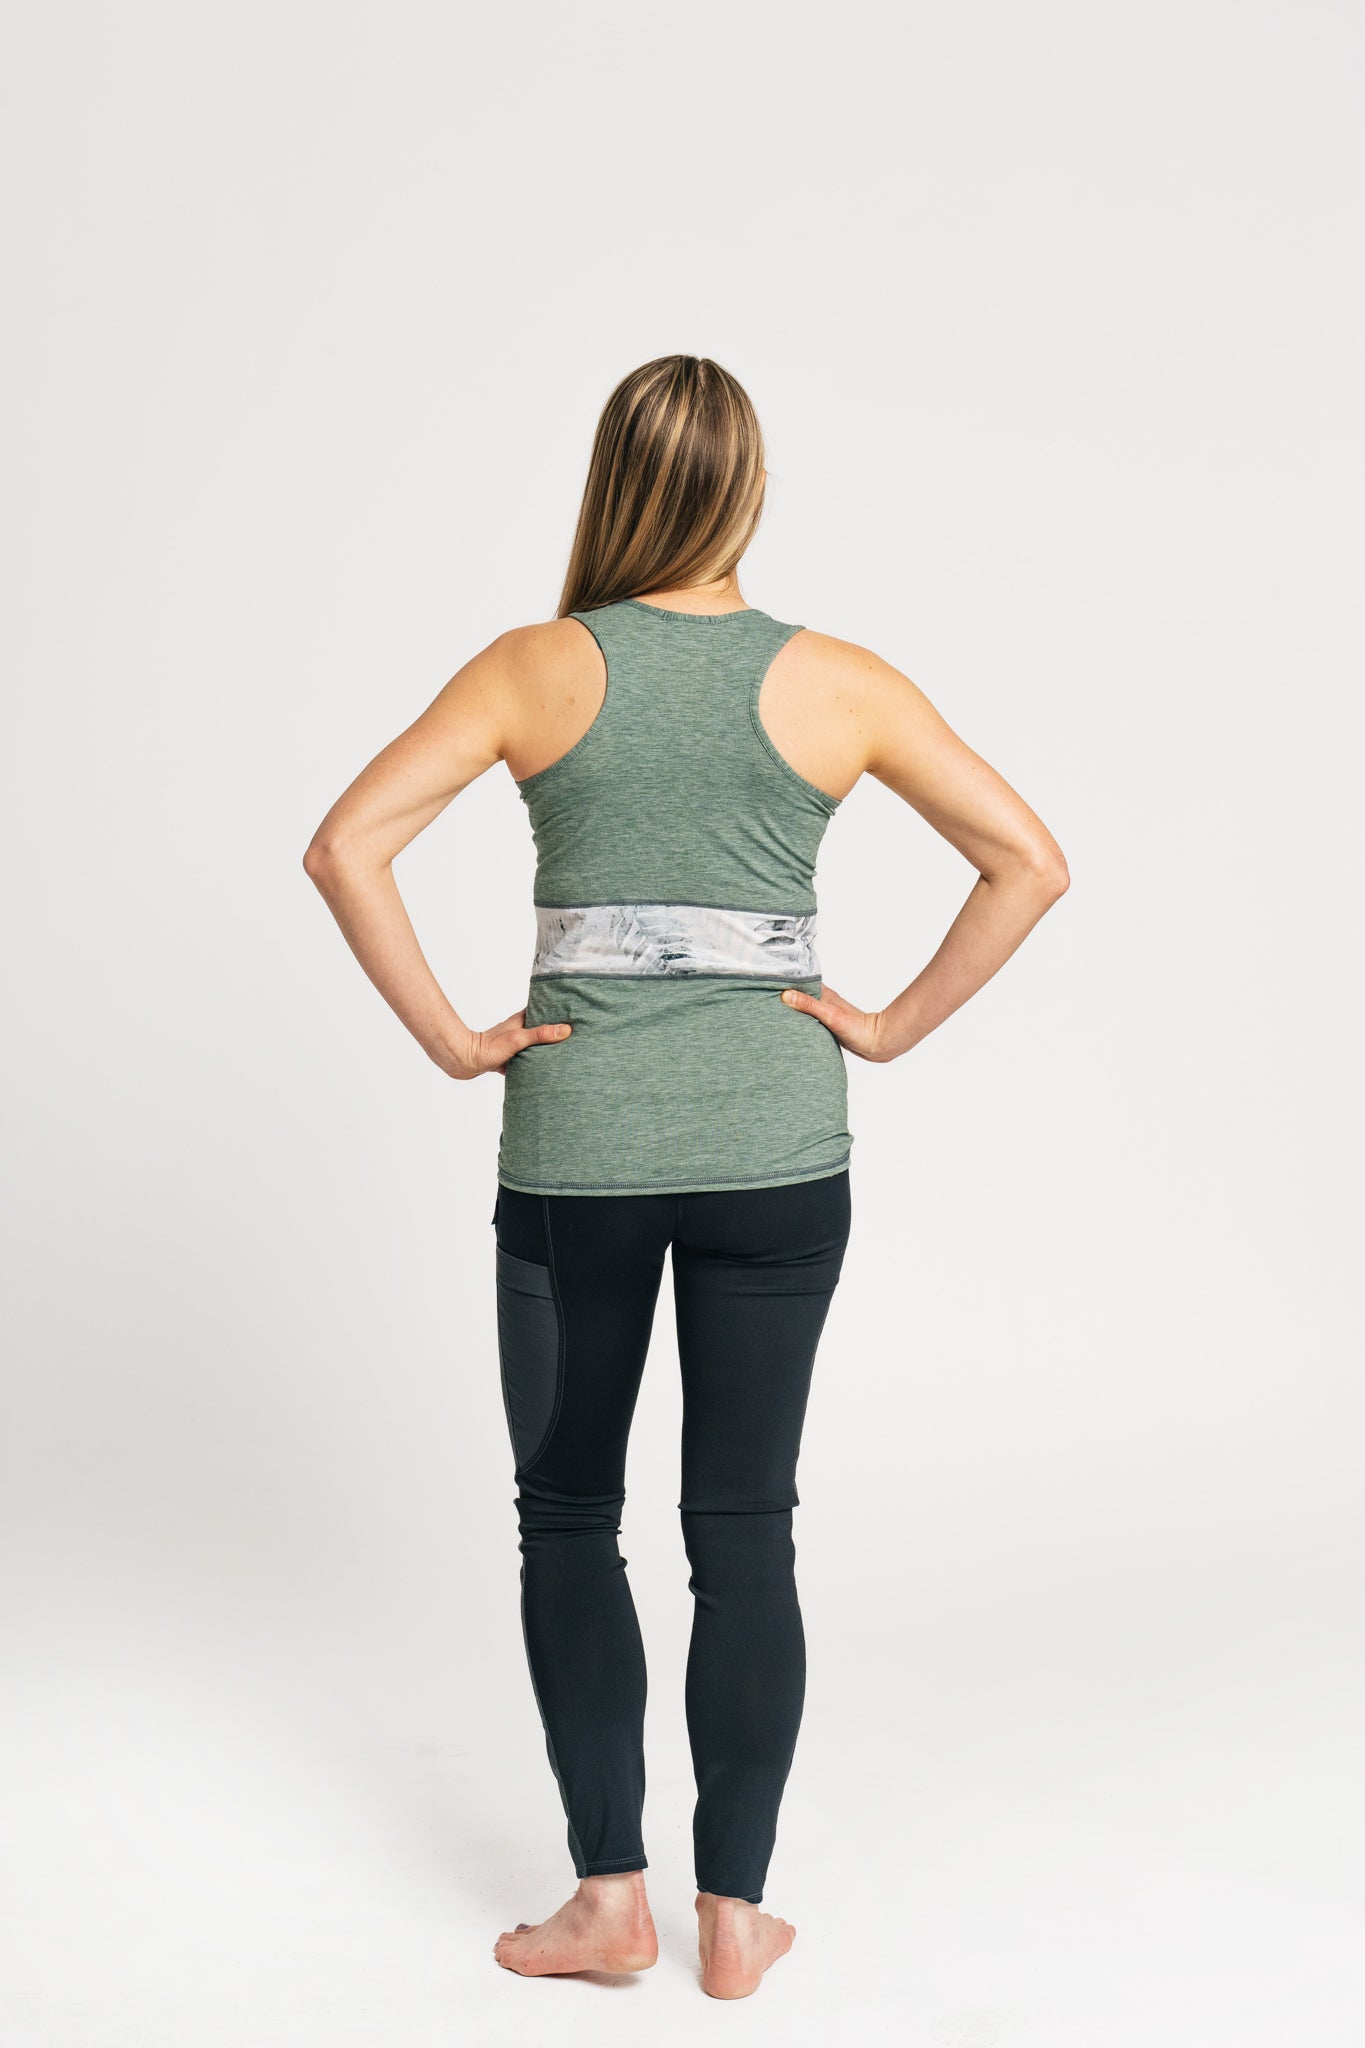 alpine fit tank top on model viewed from behind